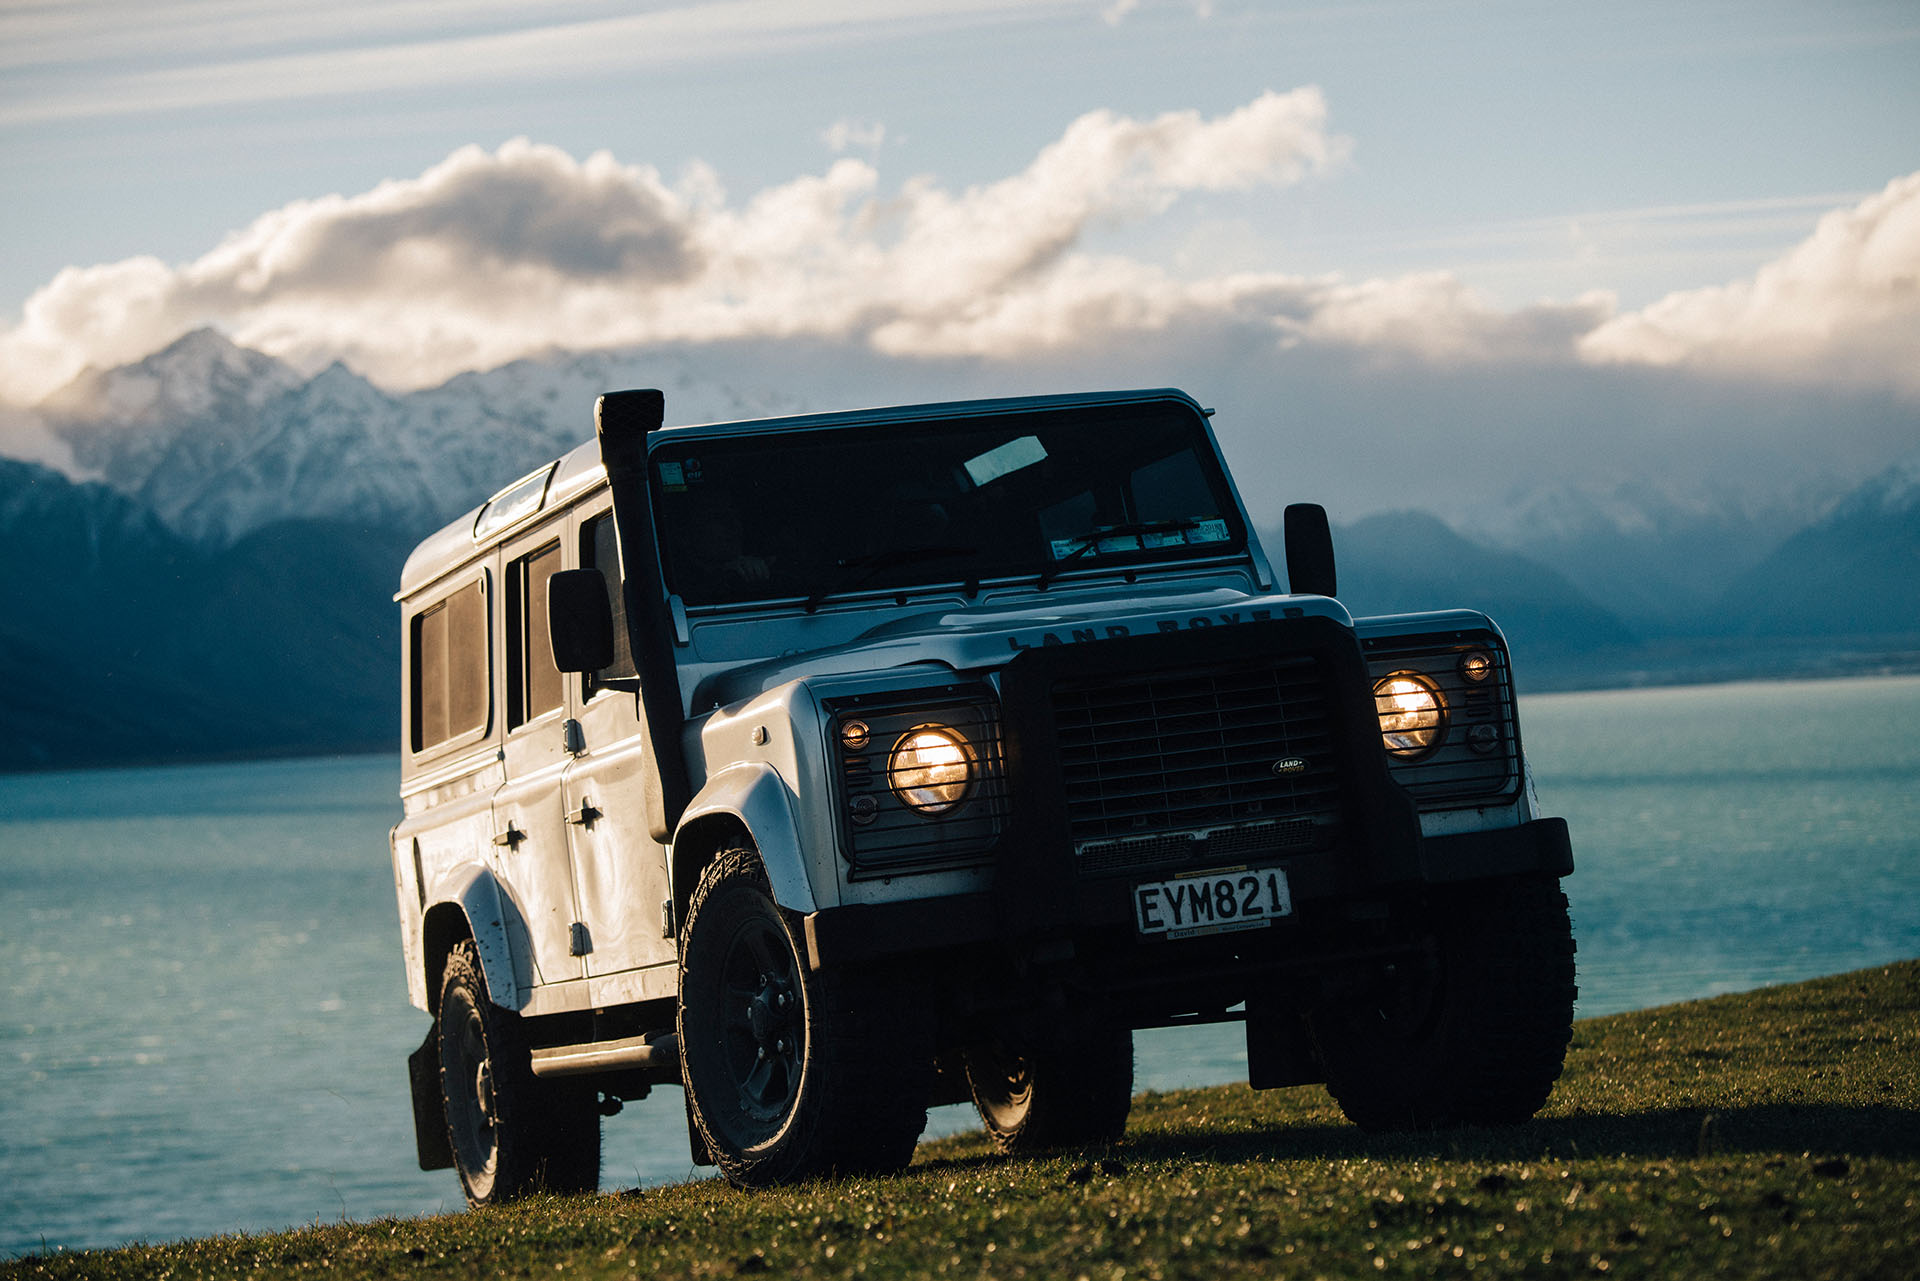 Land Rover with moody lighting, on a hillside with lake and snow capped mountains in the background